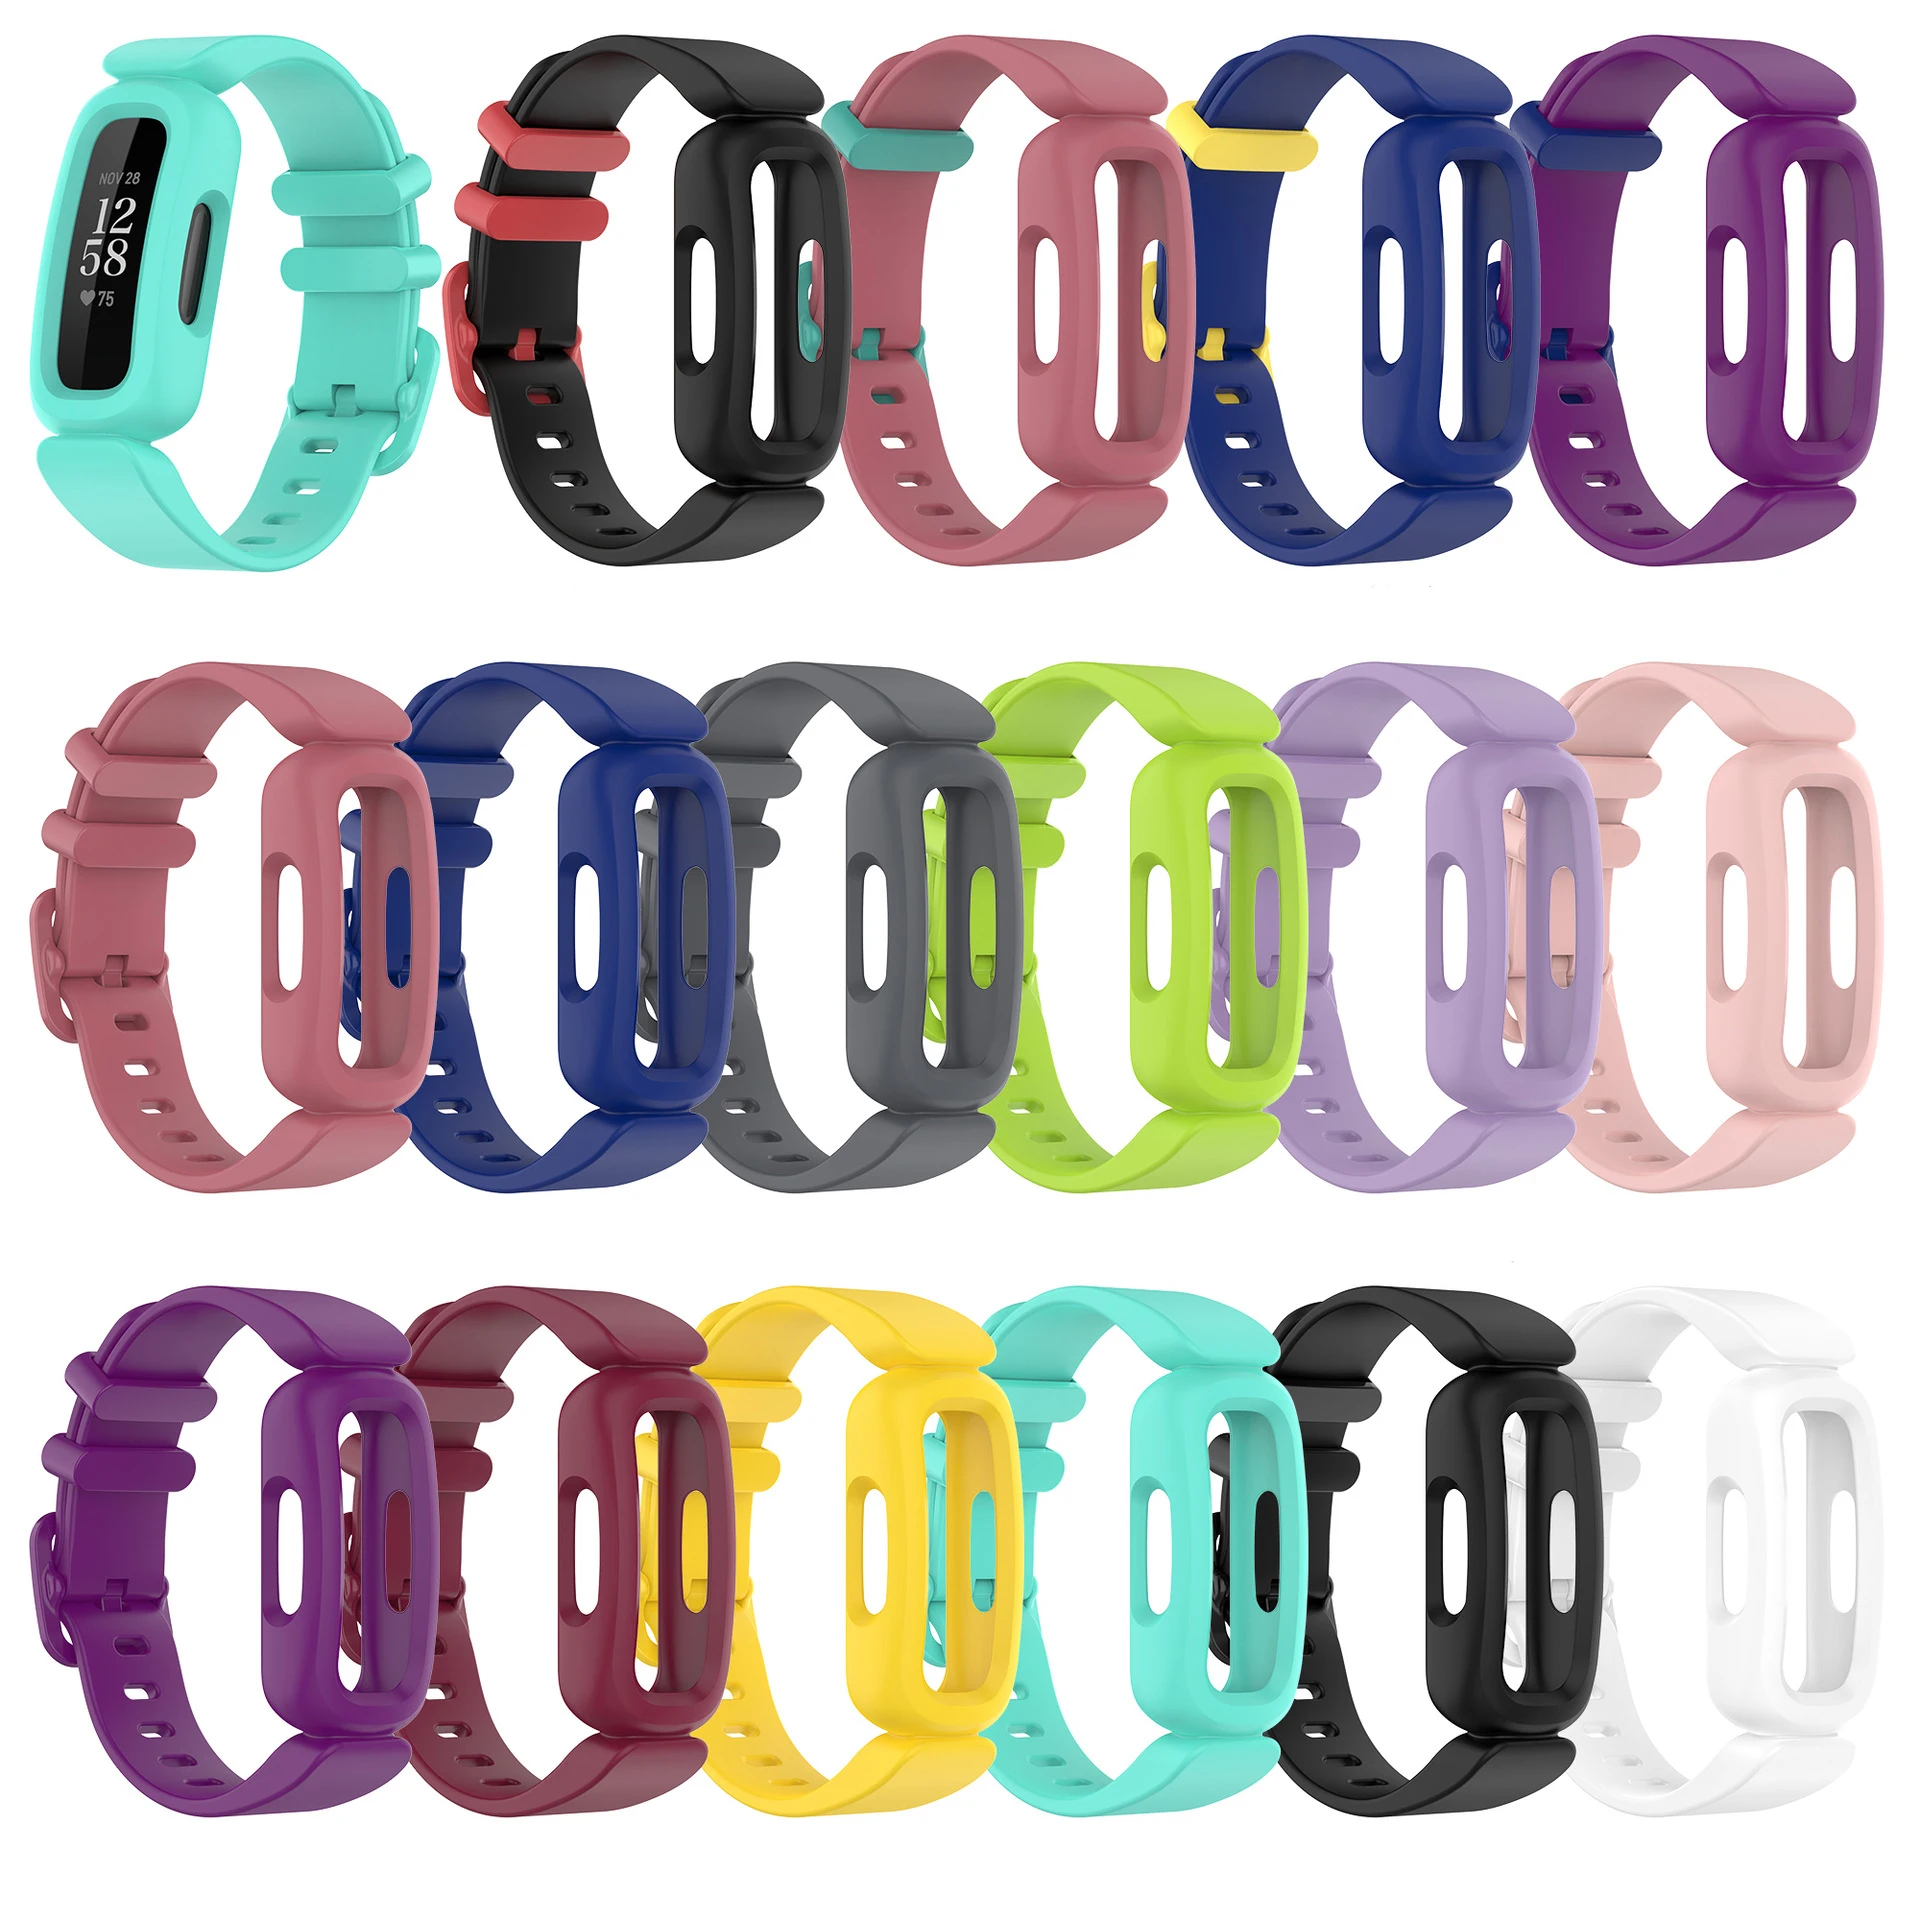 

BOORUI fashion soft silicone straps for fitbit inspire 2 band sport washable for fitbit ace 3 watch band, 16 colors